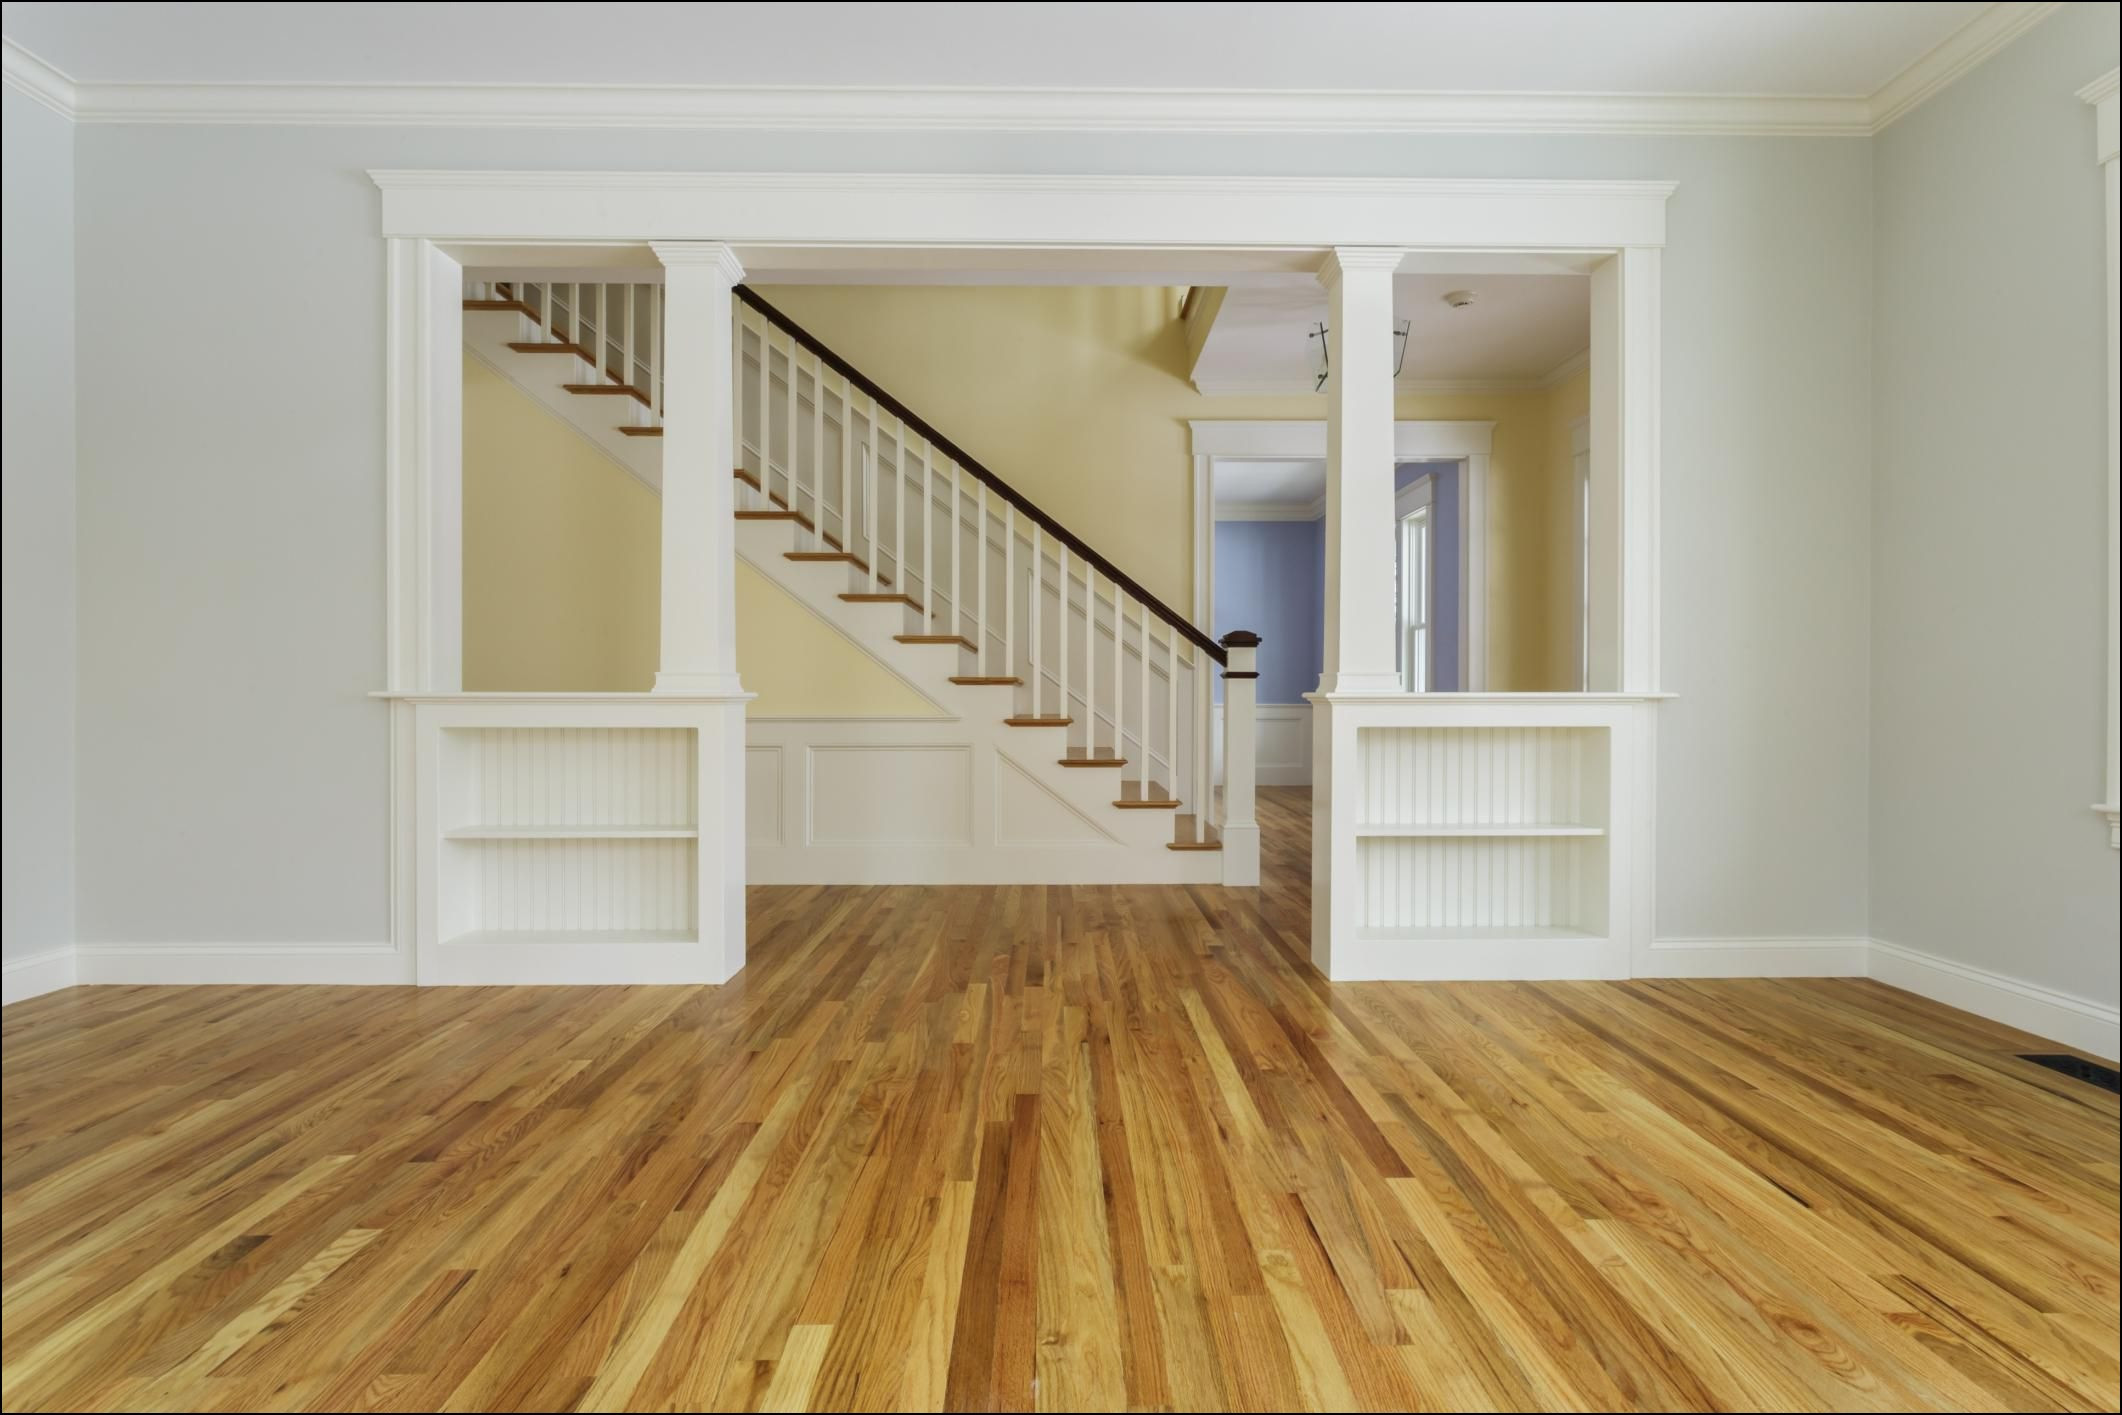 16 Lovely Cost Of Hardwood Flooring In Canada 2024 free download cost of hardwood flooring in canada of hardwood flooring suppliers france flooring ideas with regard to hardwood flooring cost for 1000 square feet stock guide to solid hardwood floors of ha